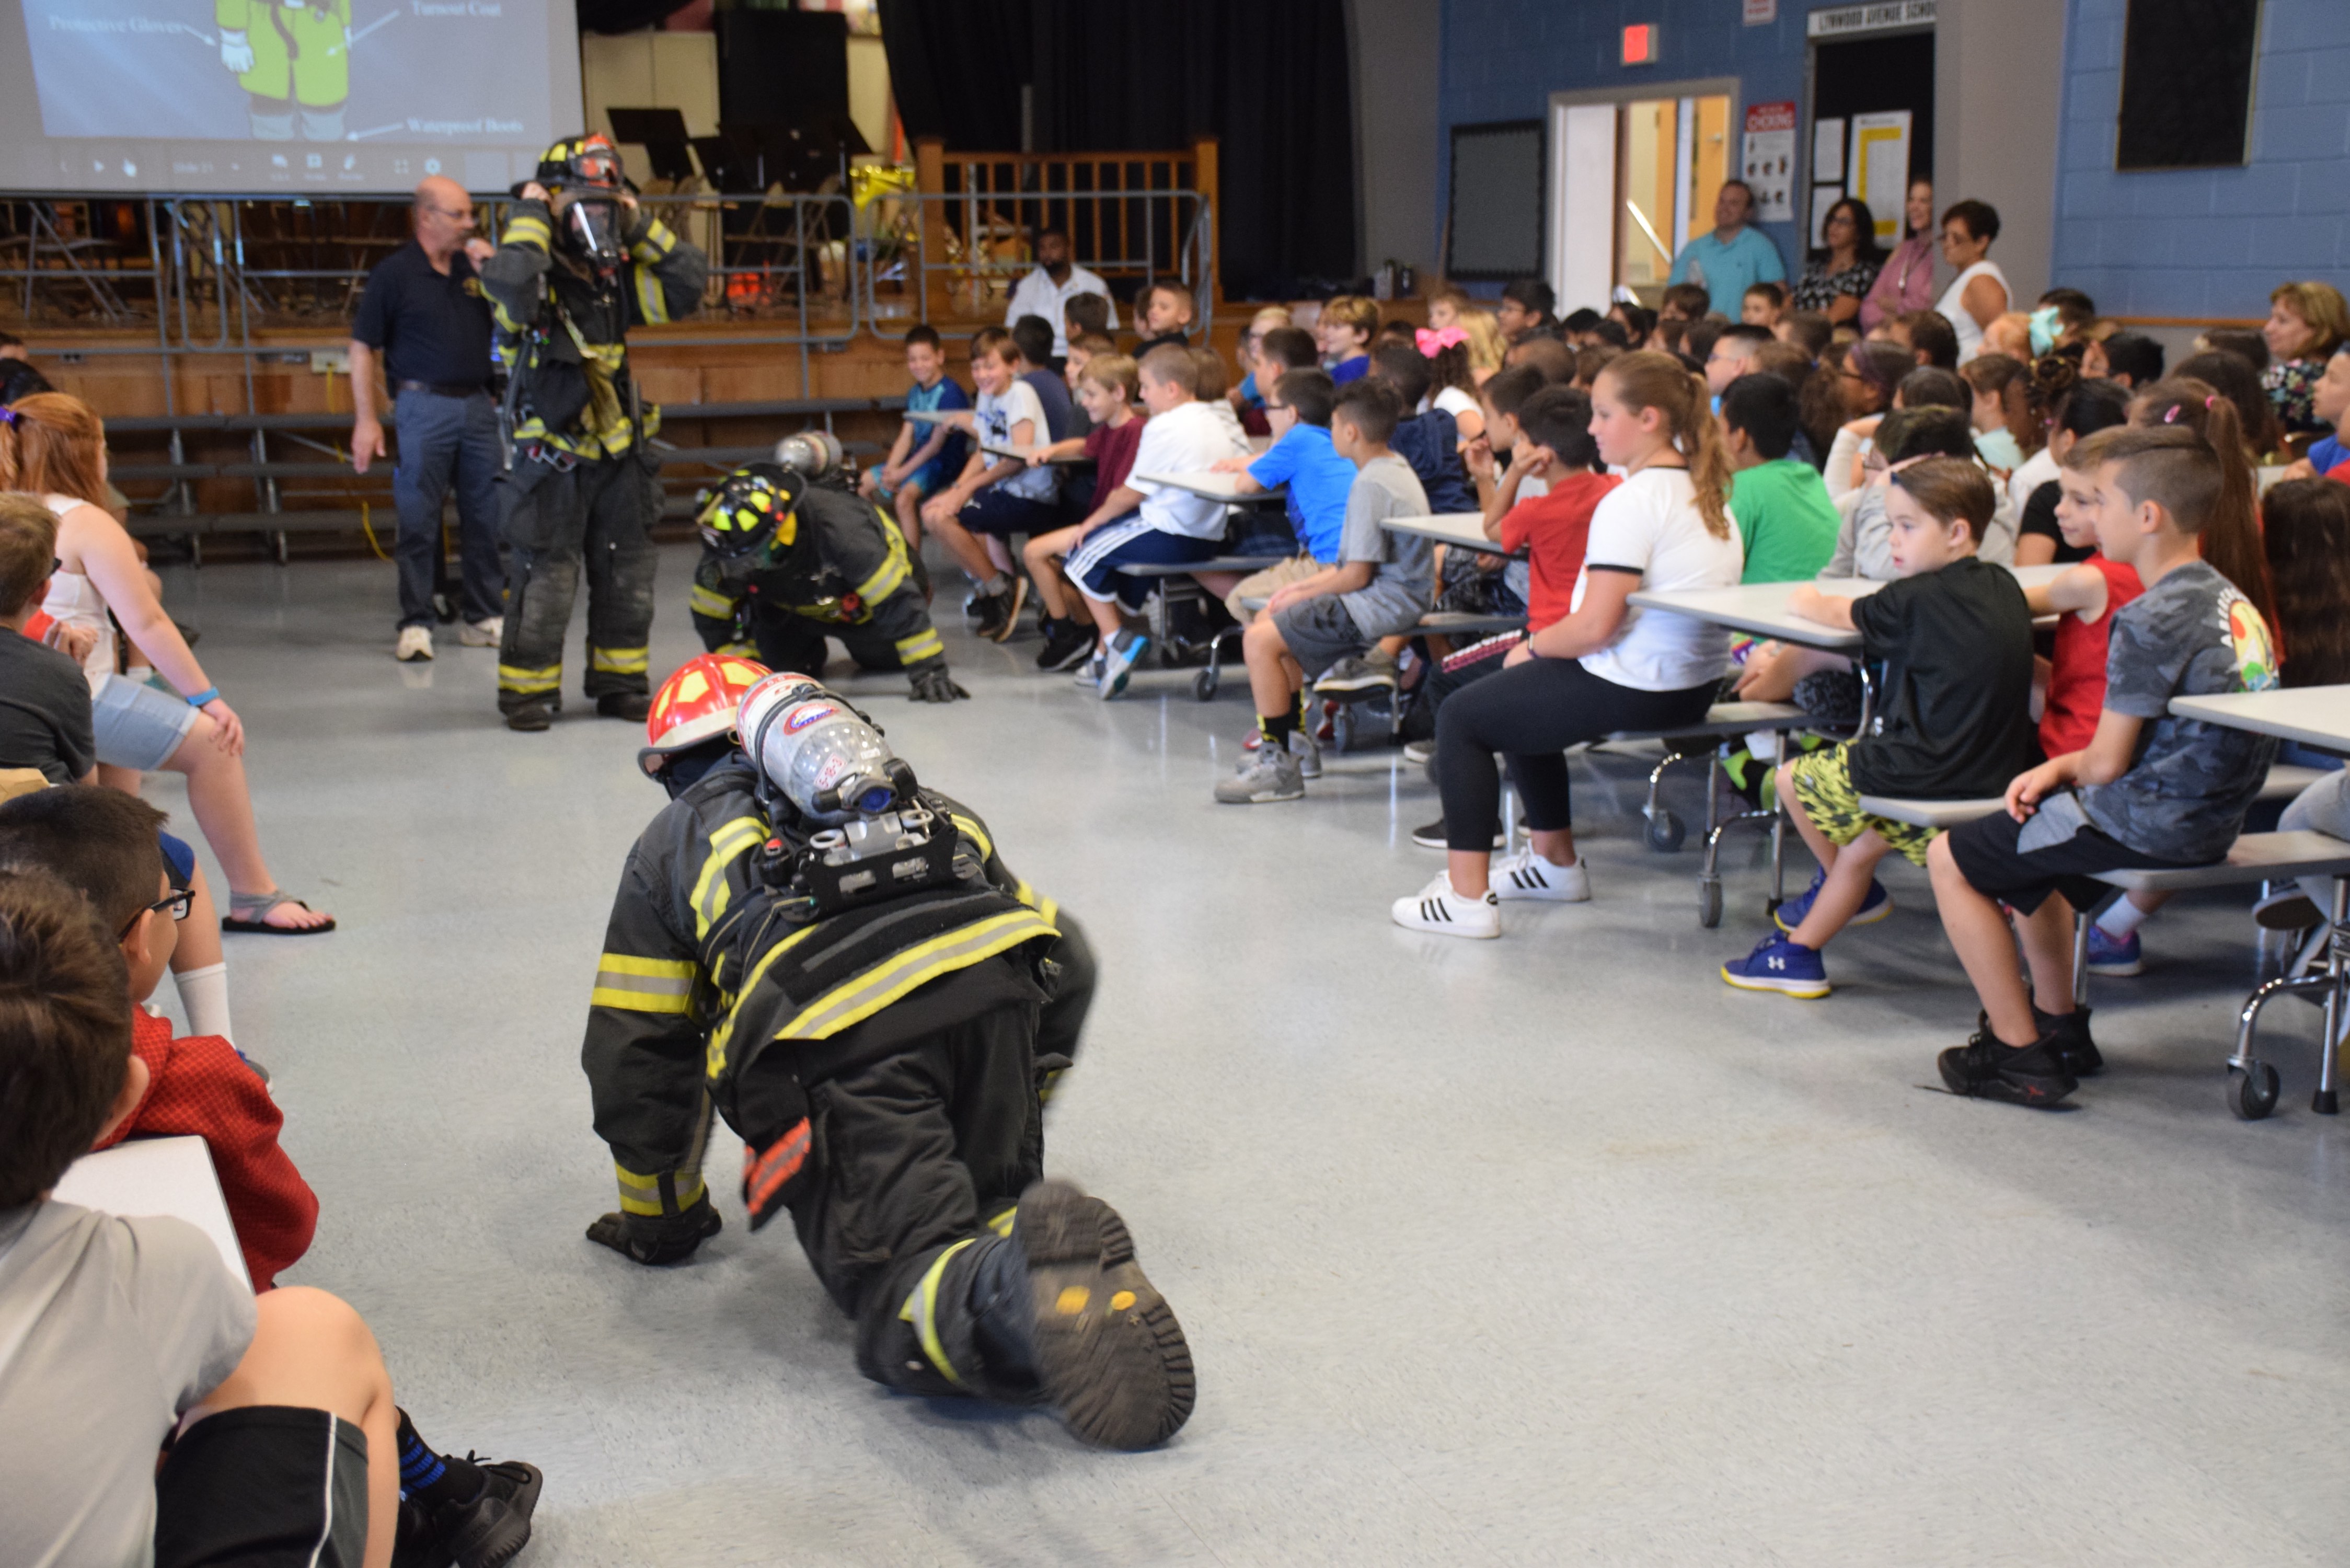 Local fire departments share lifesaving lessons